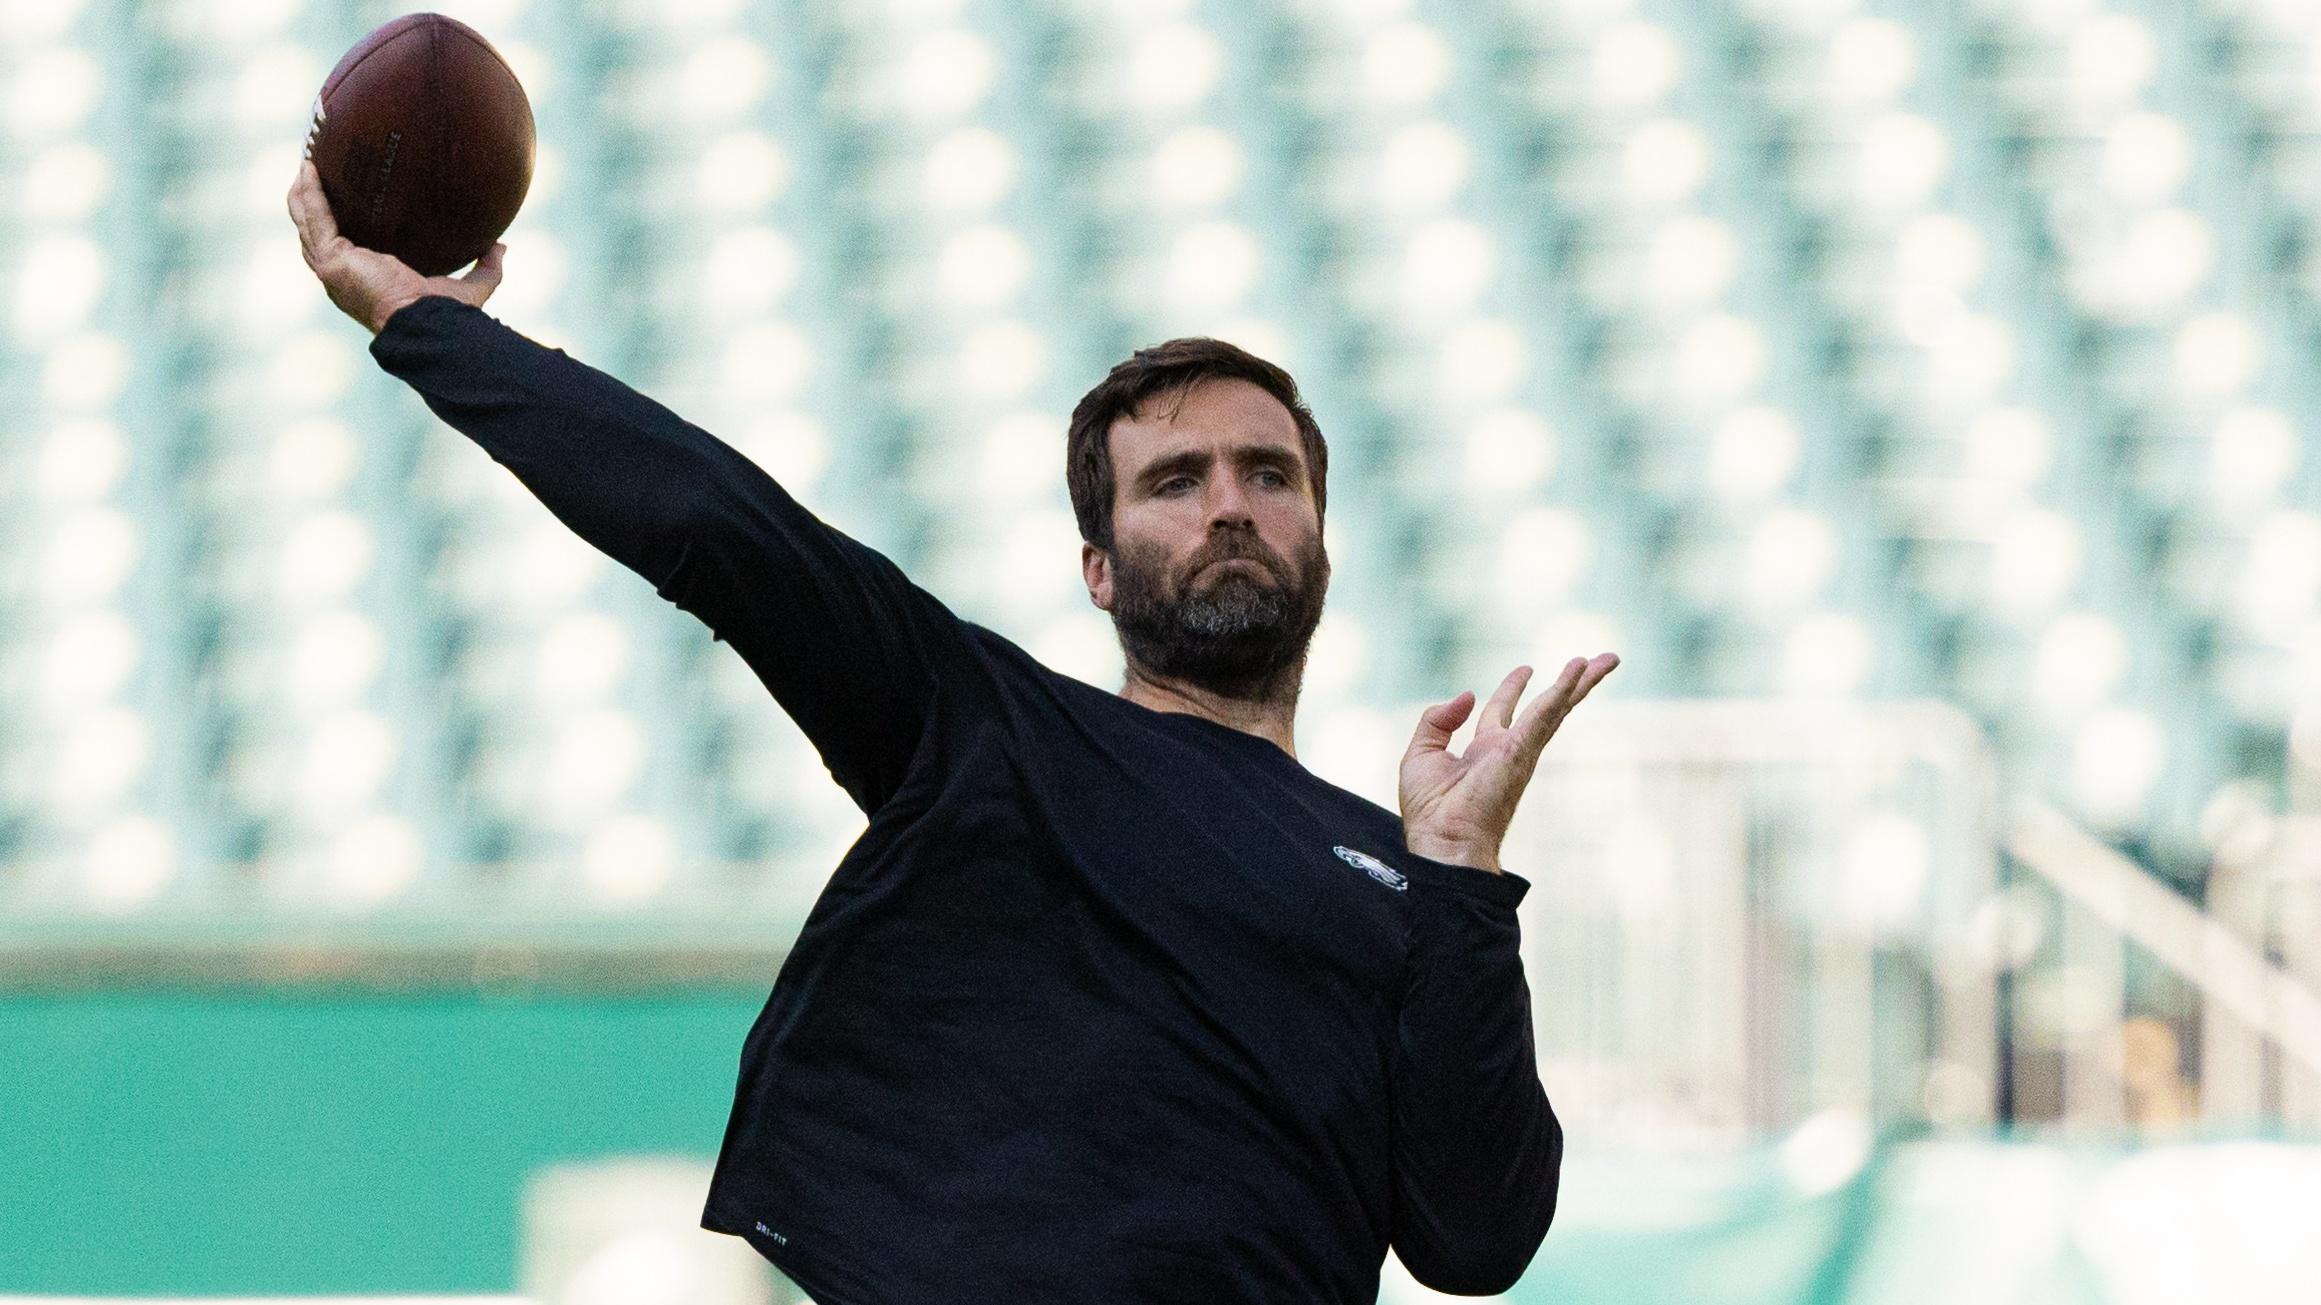 Aug 12, 2021; Philadelphia, Pennsylvania, USA; Philadelphia Eagles quarterback Joe Flacco warms up before action against the Pittsburgh Steelers at Lincoln Financial Field. Mandatory Credit: Bill Streicher-USA TODAY Sports / © Bill Streicher-USA TODAY Sports